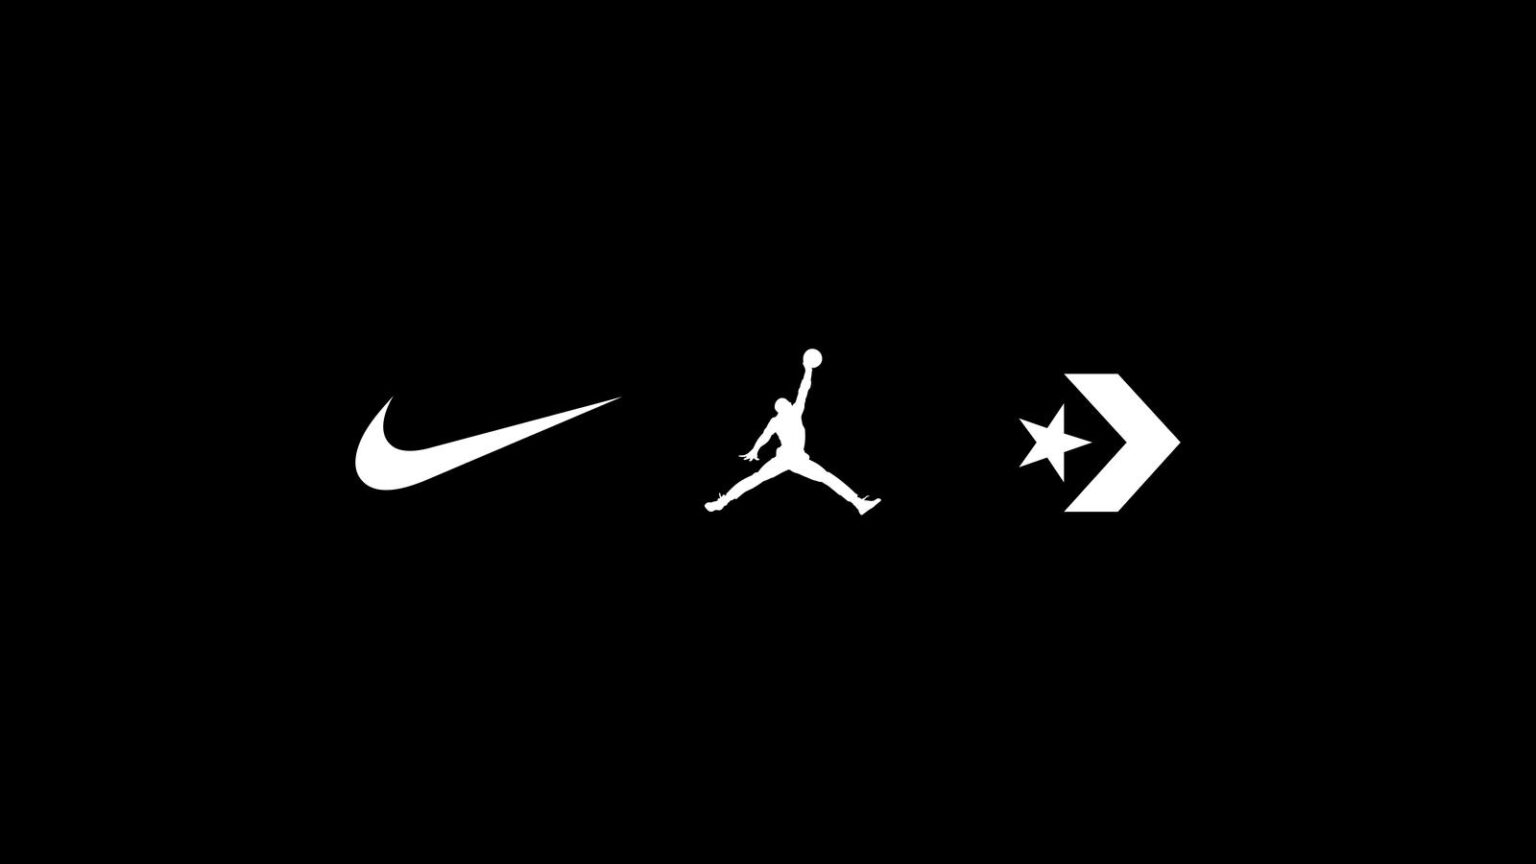 Nike to Invest $40 Million in Support of Black Community - Earnshaws ...